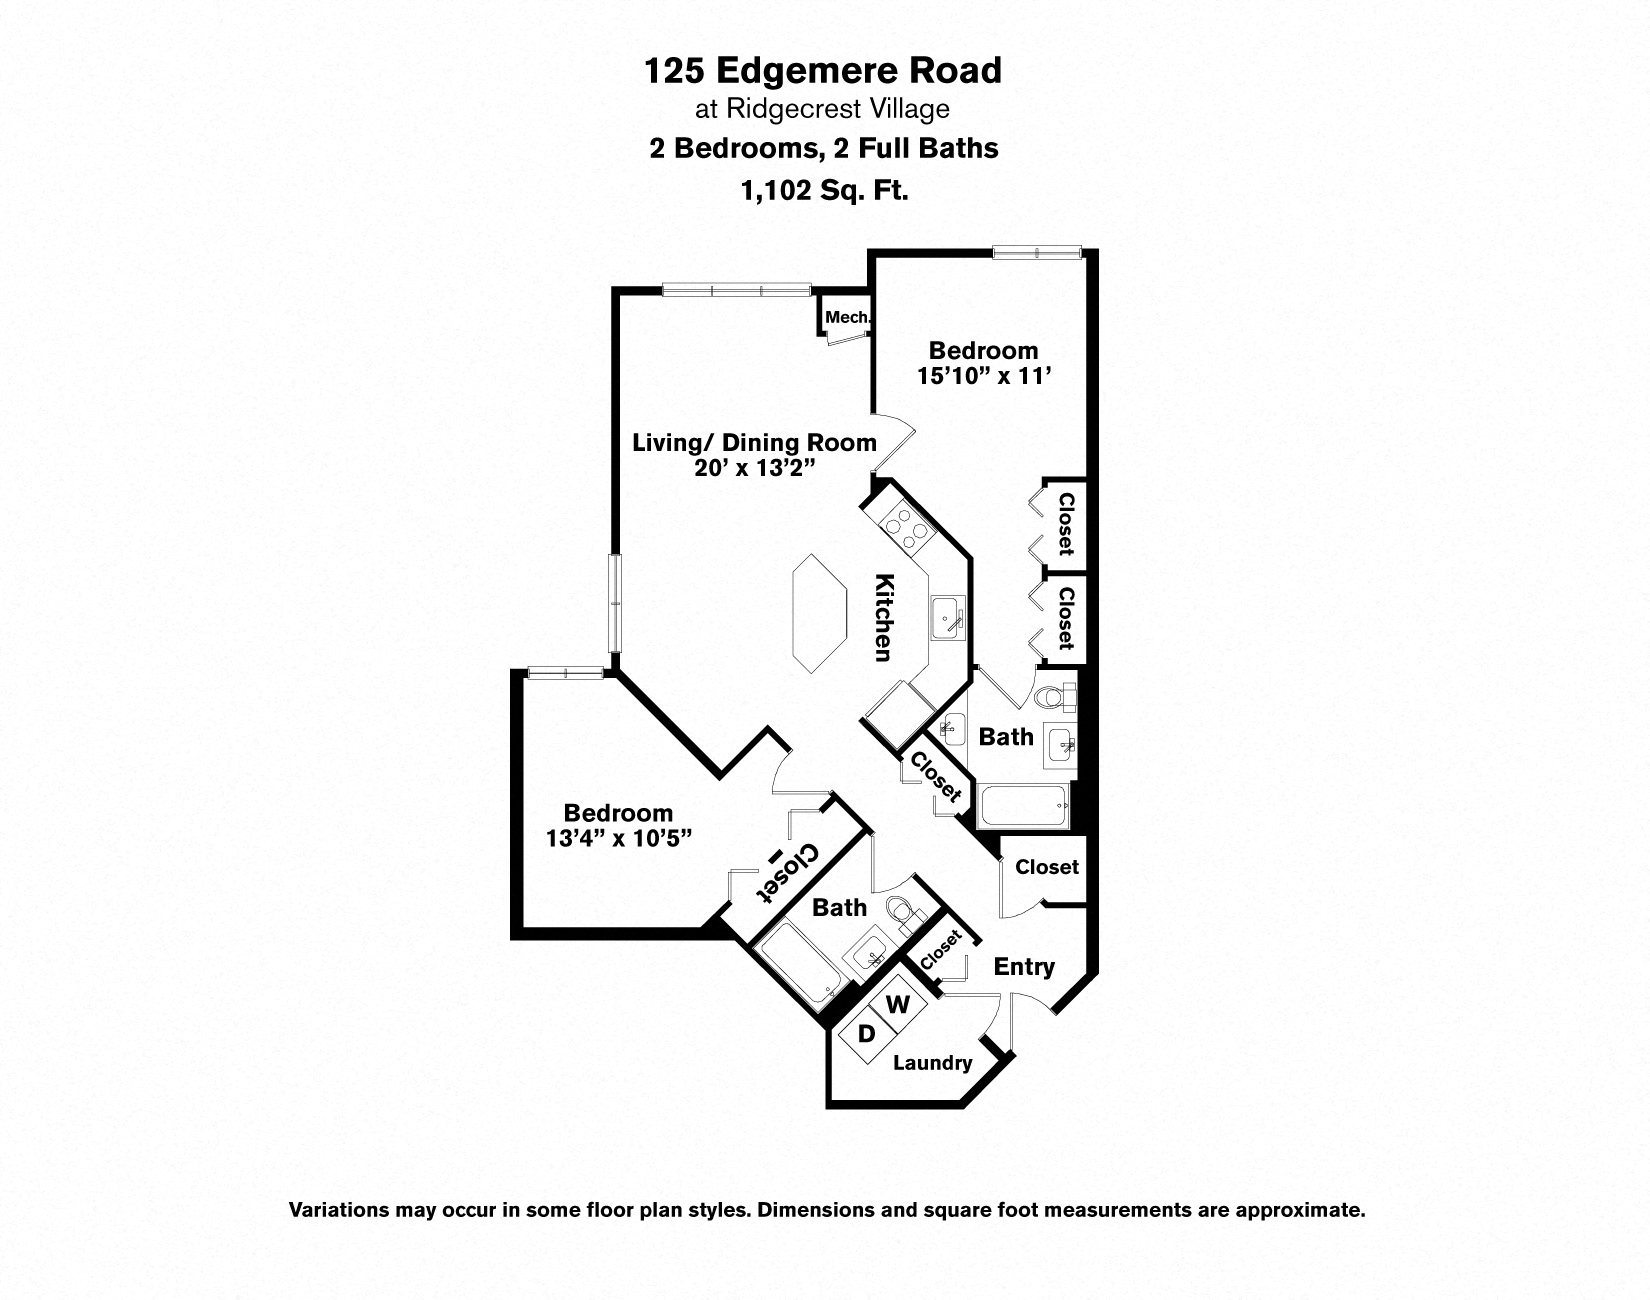 Click to view Floor plan 2 Bed/2 Bath - Edgemere image 2